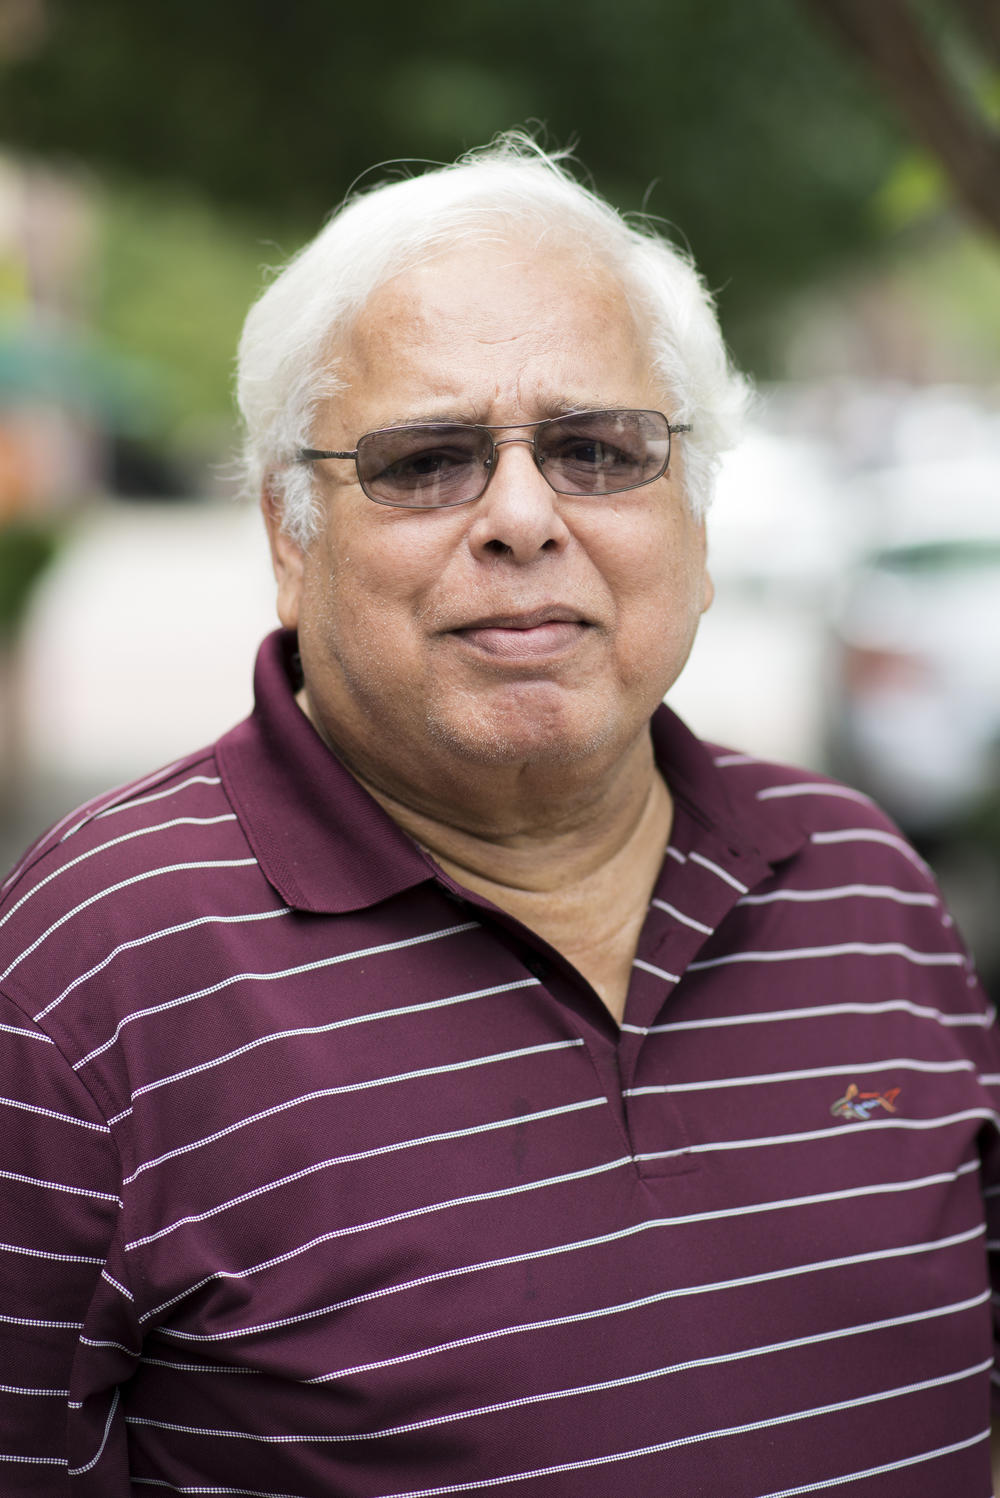 Shafqat Khan was an organizer in the Pakistani immigrant community in New Jersey. He died of COVID on April 14, 2020. 